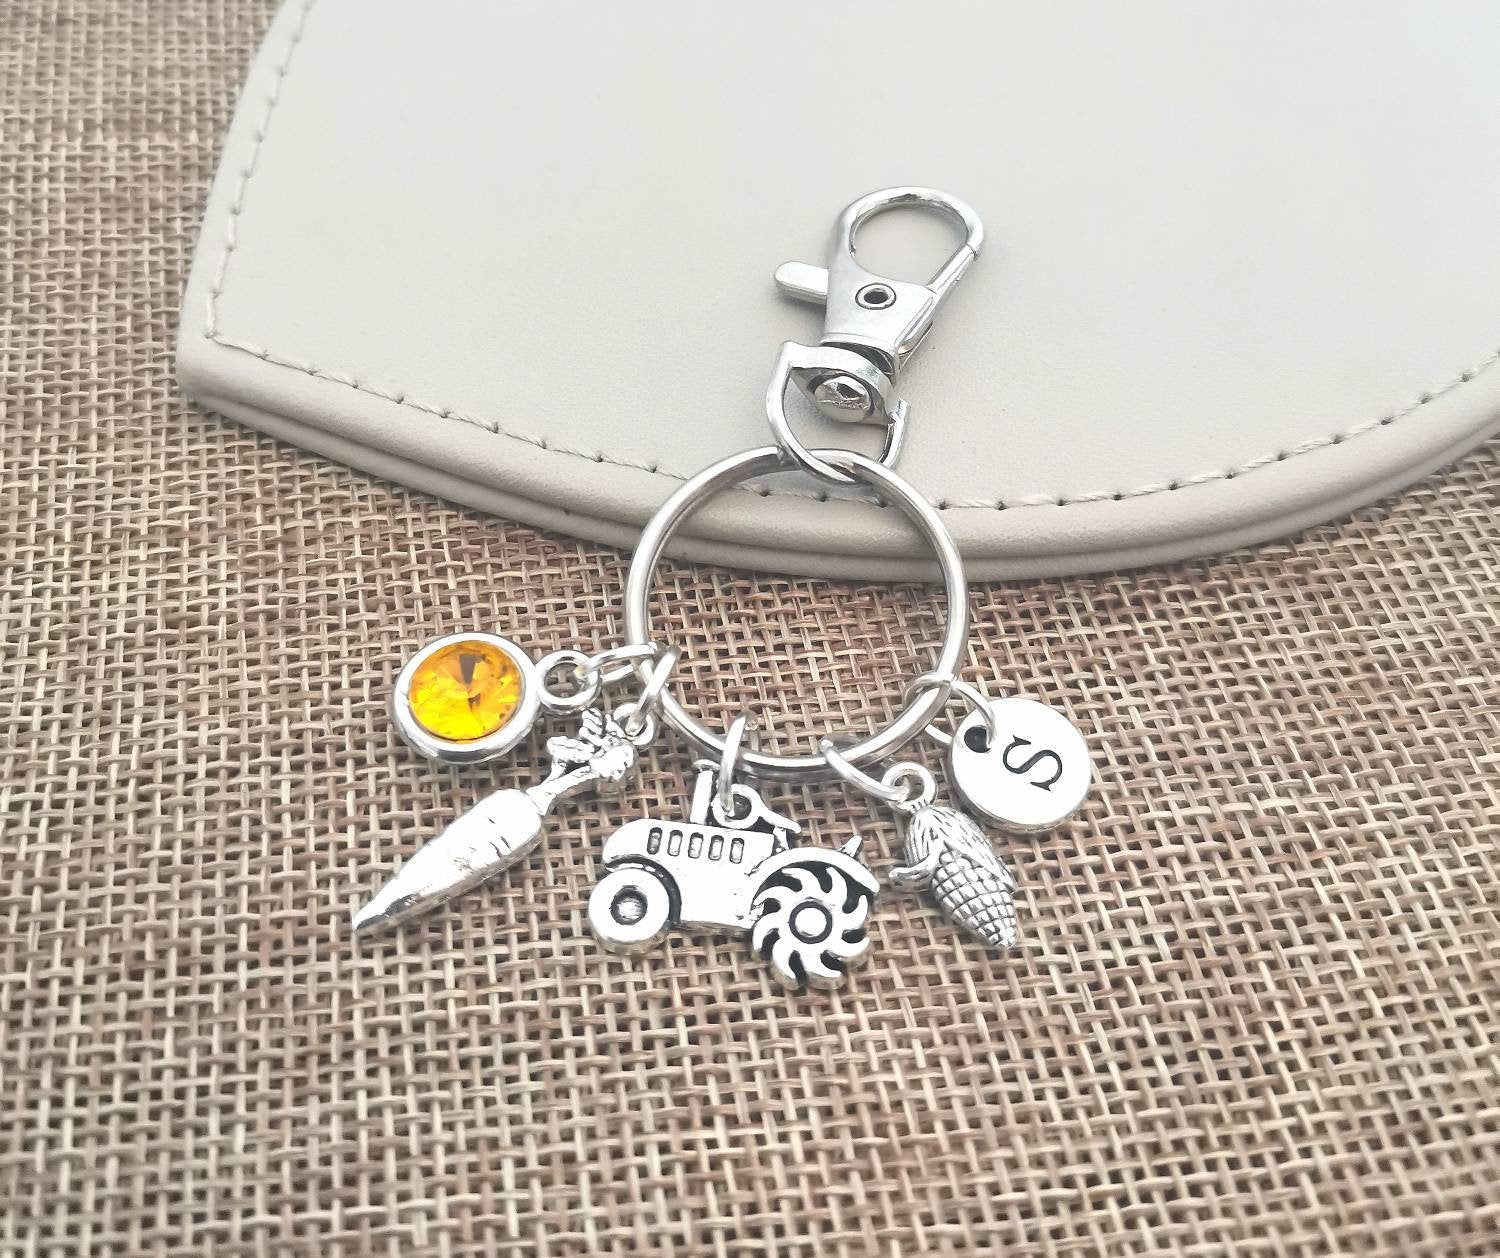 Agriculture Gift, Agriculture keyring, Agriculture keychain, Farmer, Farming, Tractor, Harvest, Farming Gift, Farming Keyring, Cultivation